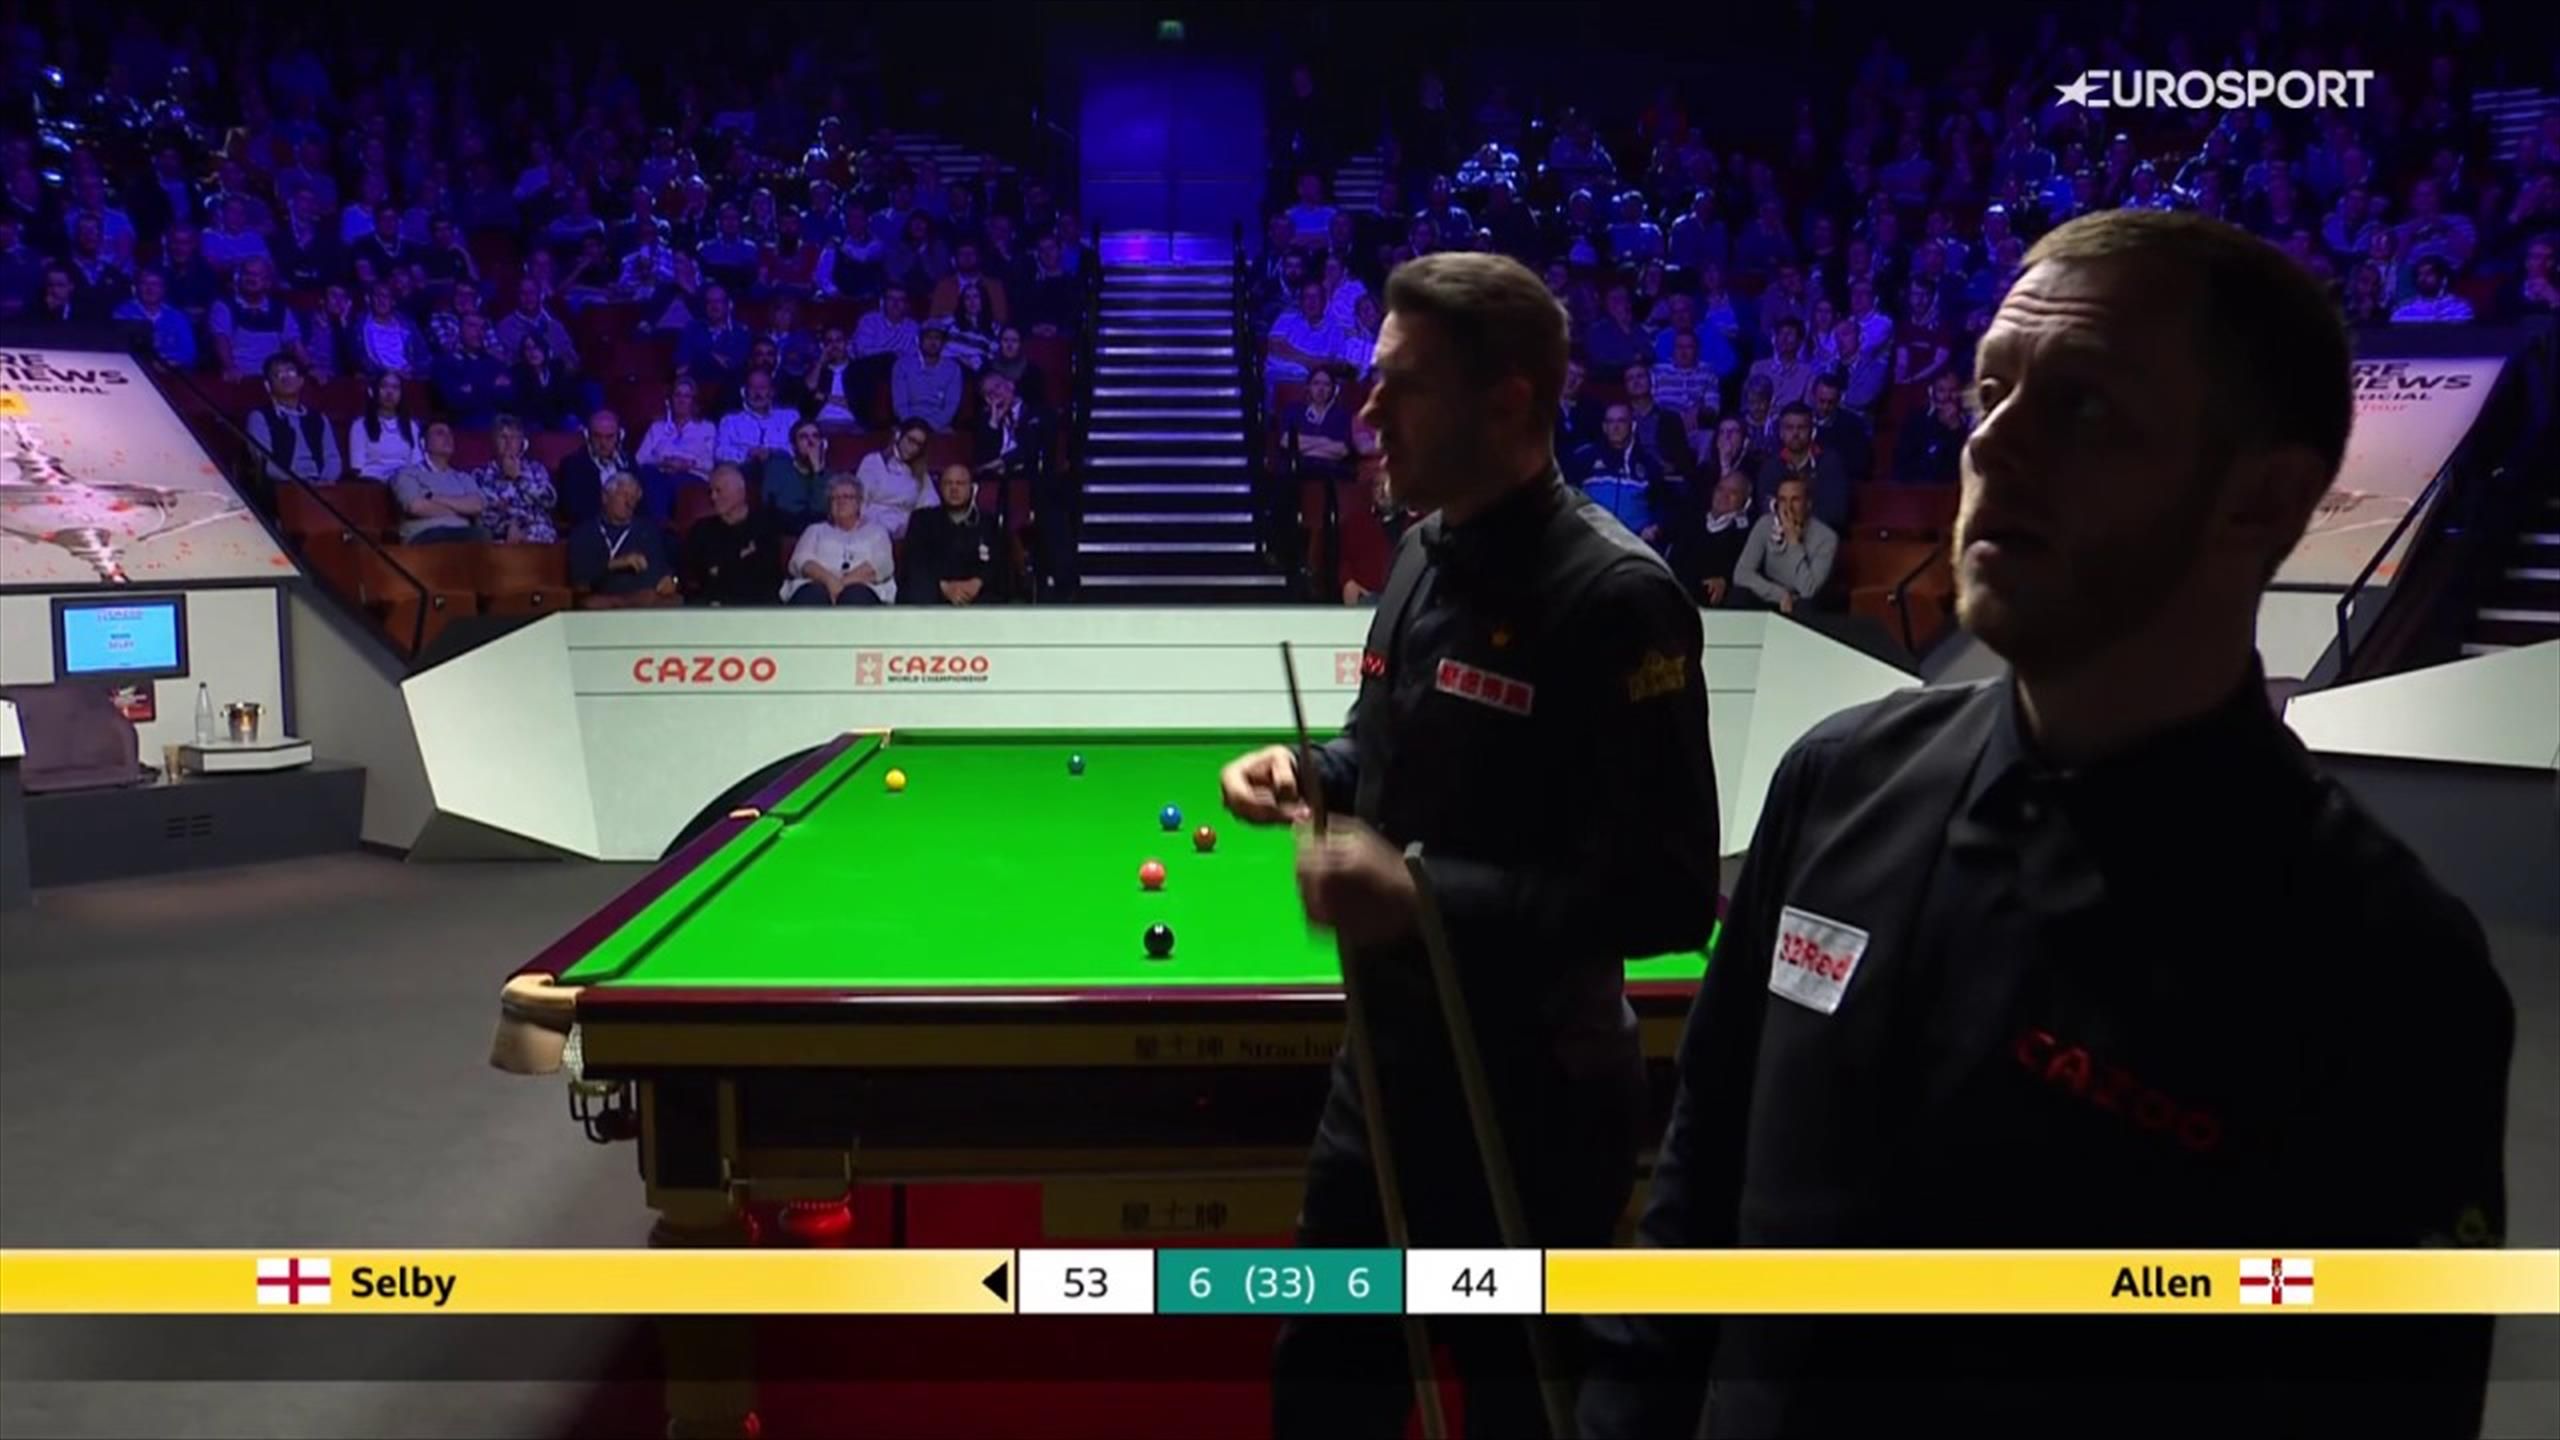 World Snooker Championship Scoreboard gaffe causes confusion between Mark Allen and Mark Selby